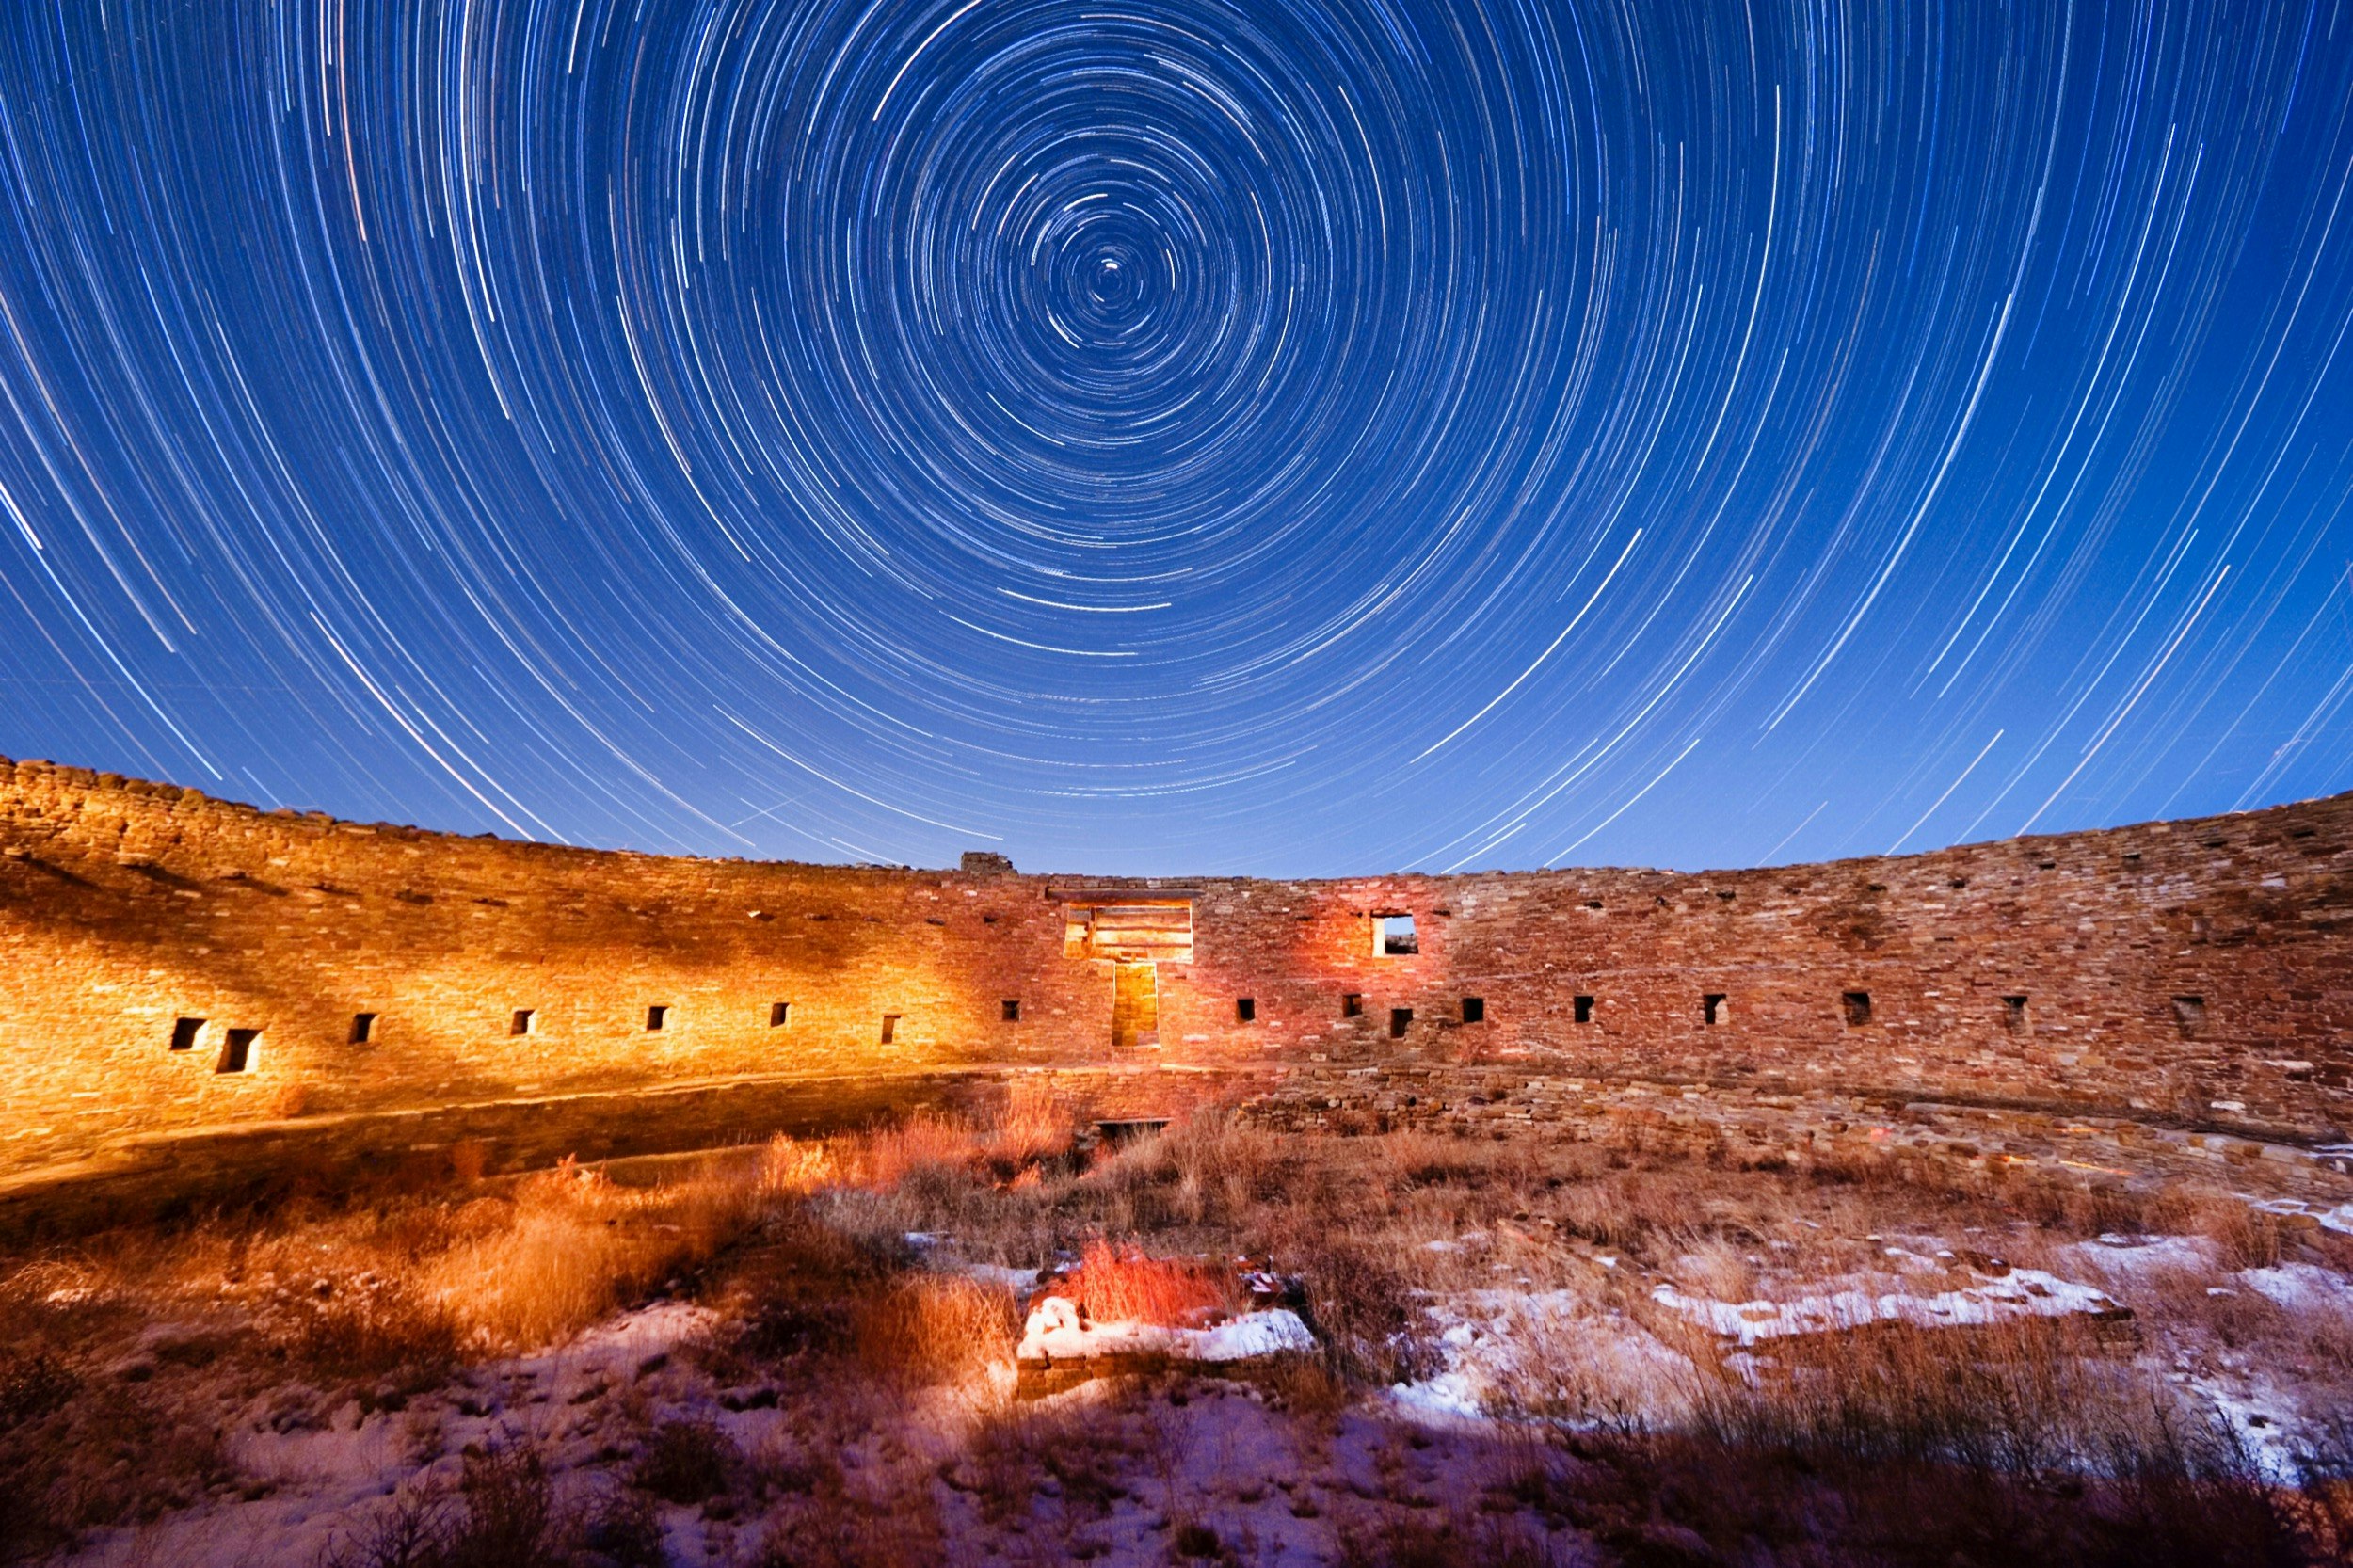 Time lapse photo of Casa Rinconada with star paths.